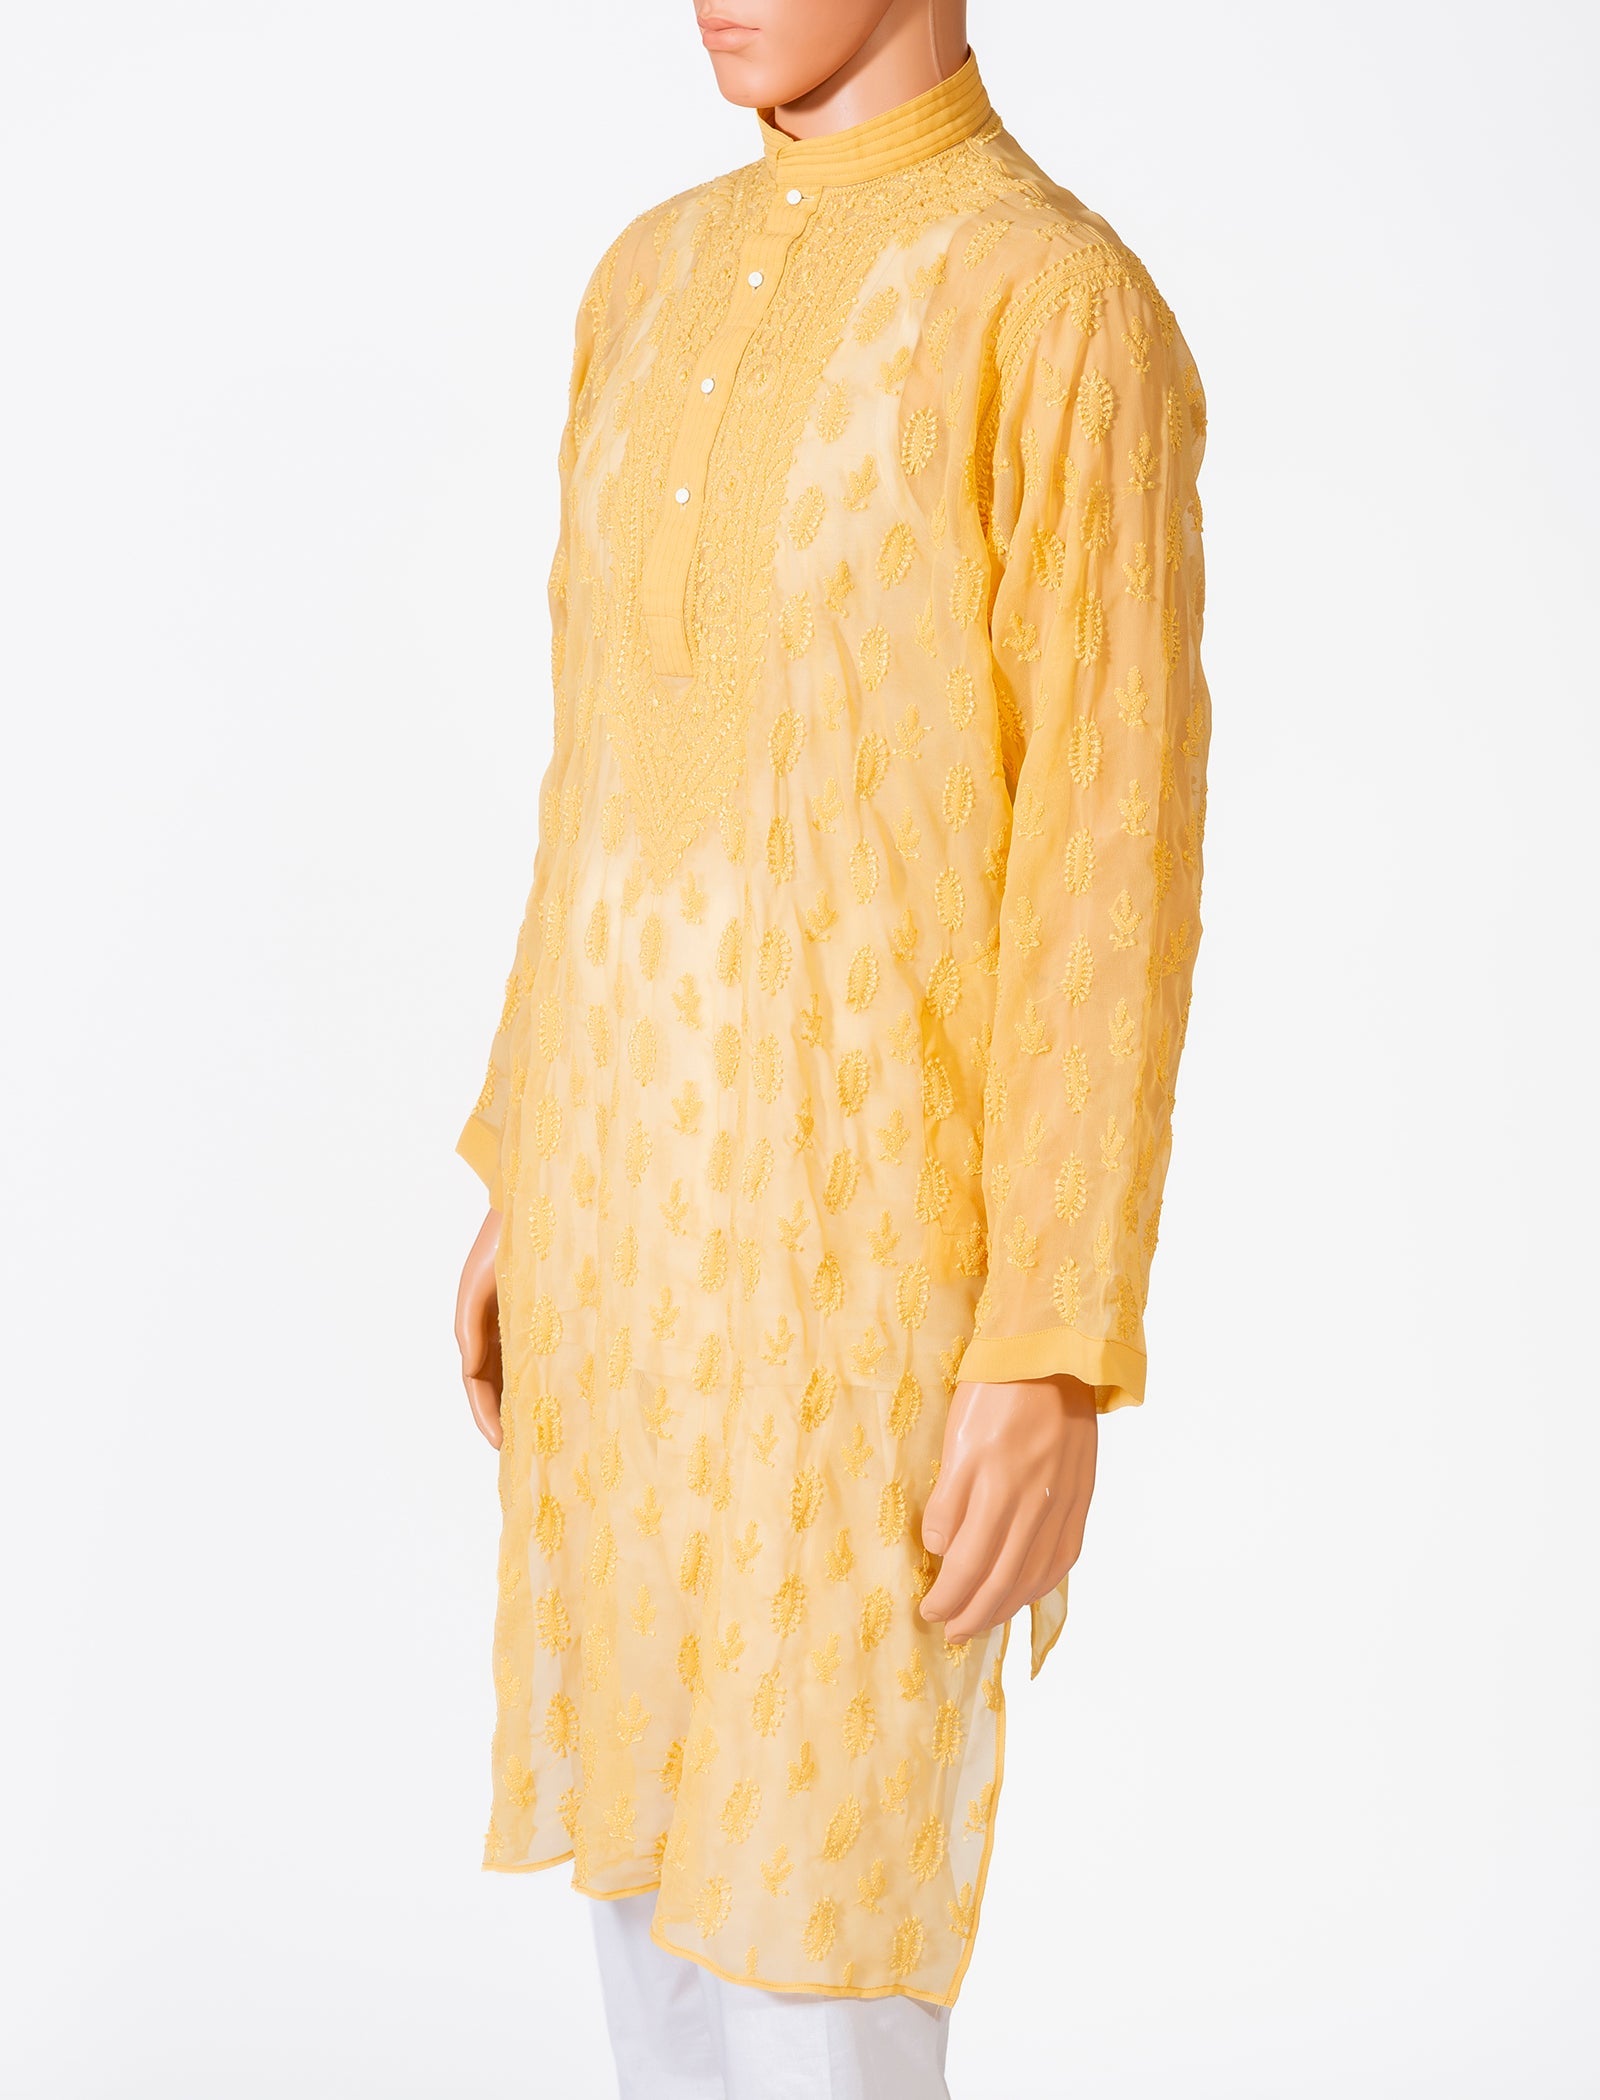 Lucknow Chikan Emporium Georgette Fawn Colour Gents Kurta With Self Stripes And Fancy Hand Chikankari On Neck.